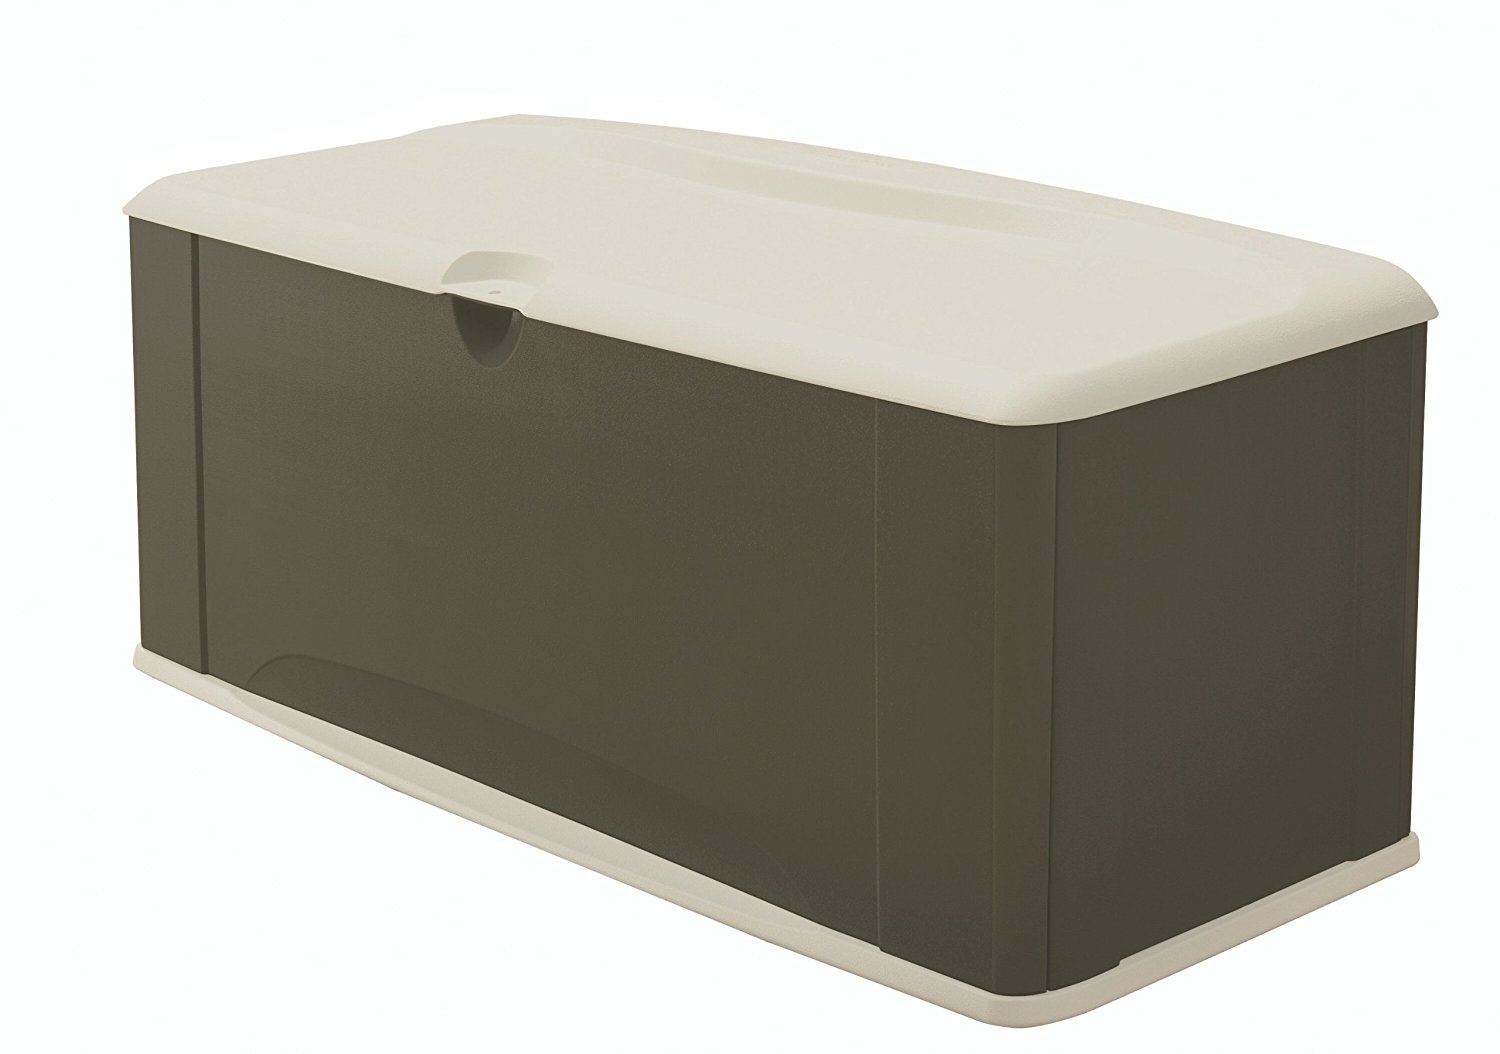 Rubbermaid Deck Box with Seat, Extra Large, 120 Gal., 16 cu. ft., Sandstone (5E39)